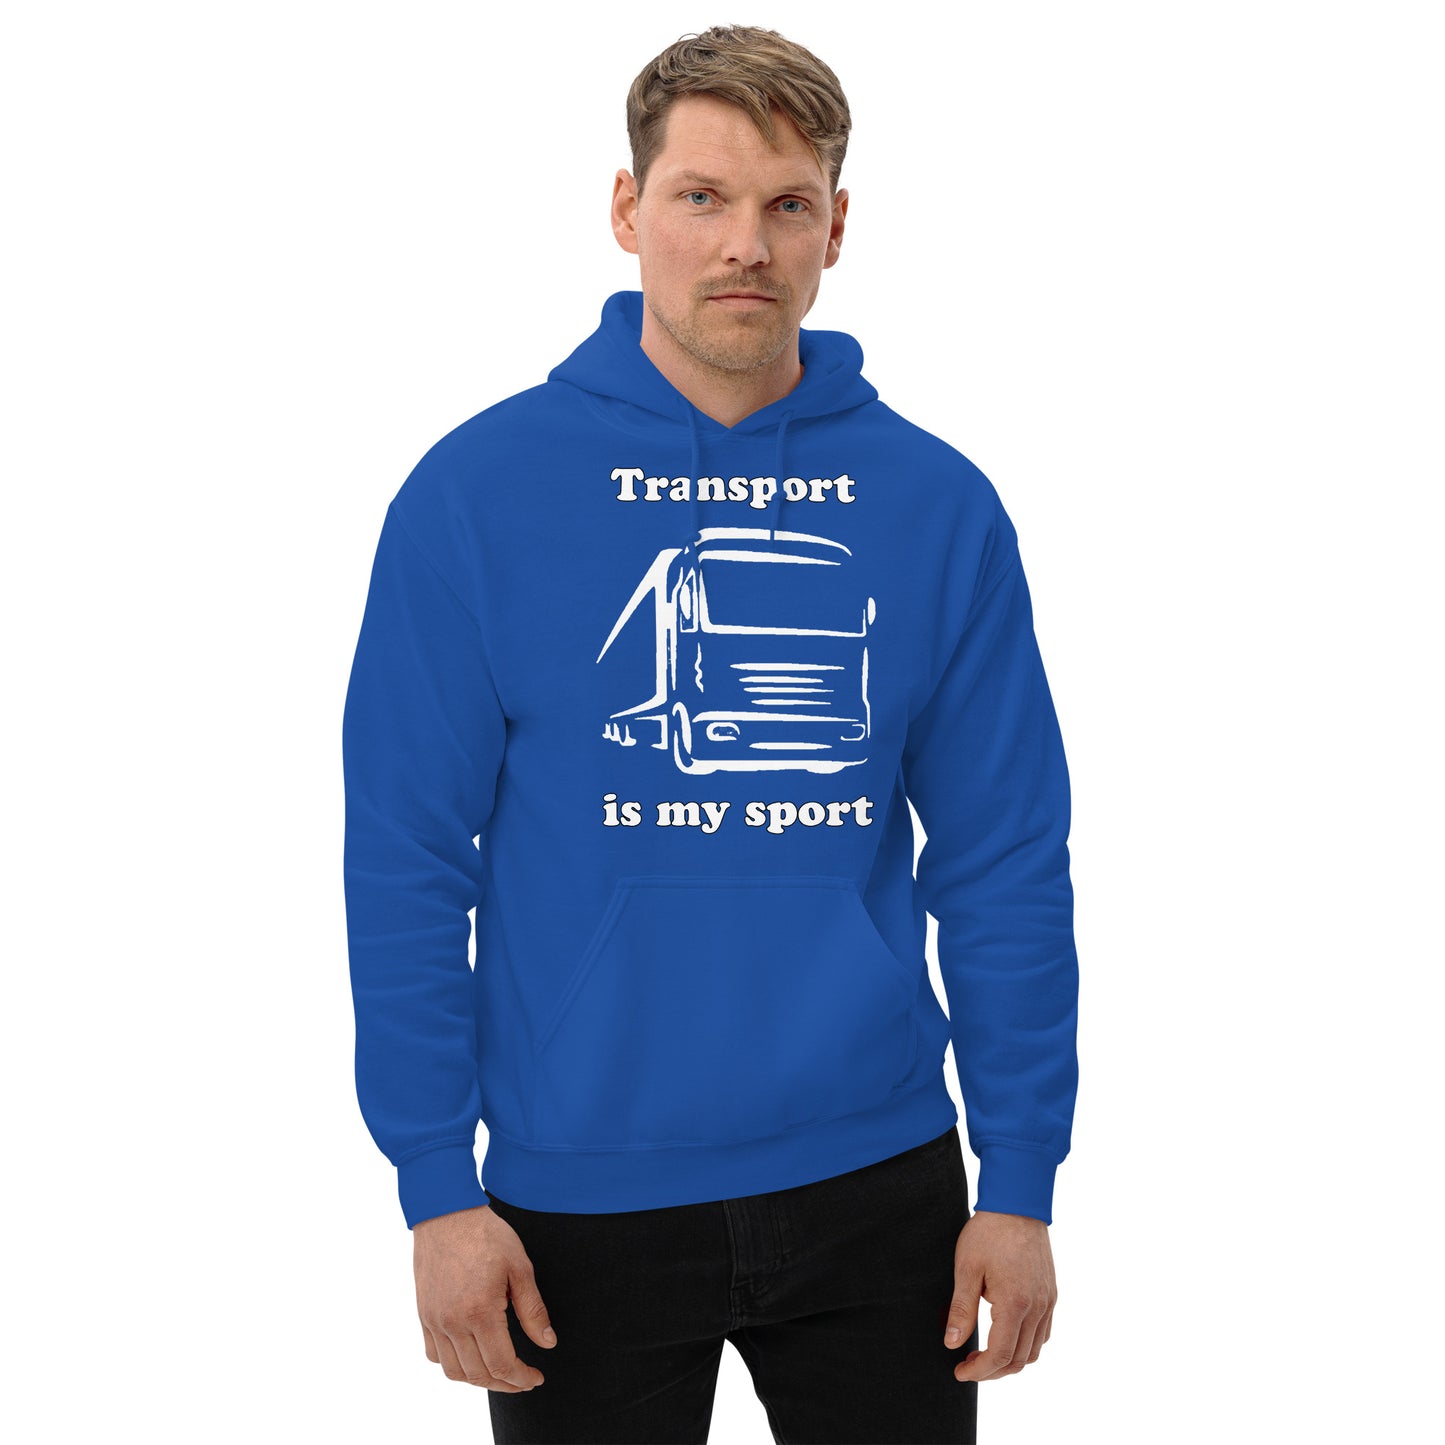 Man with royal blue hoodie with picture of truck and text "Transport is my sport"